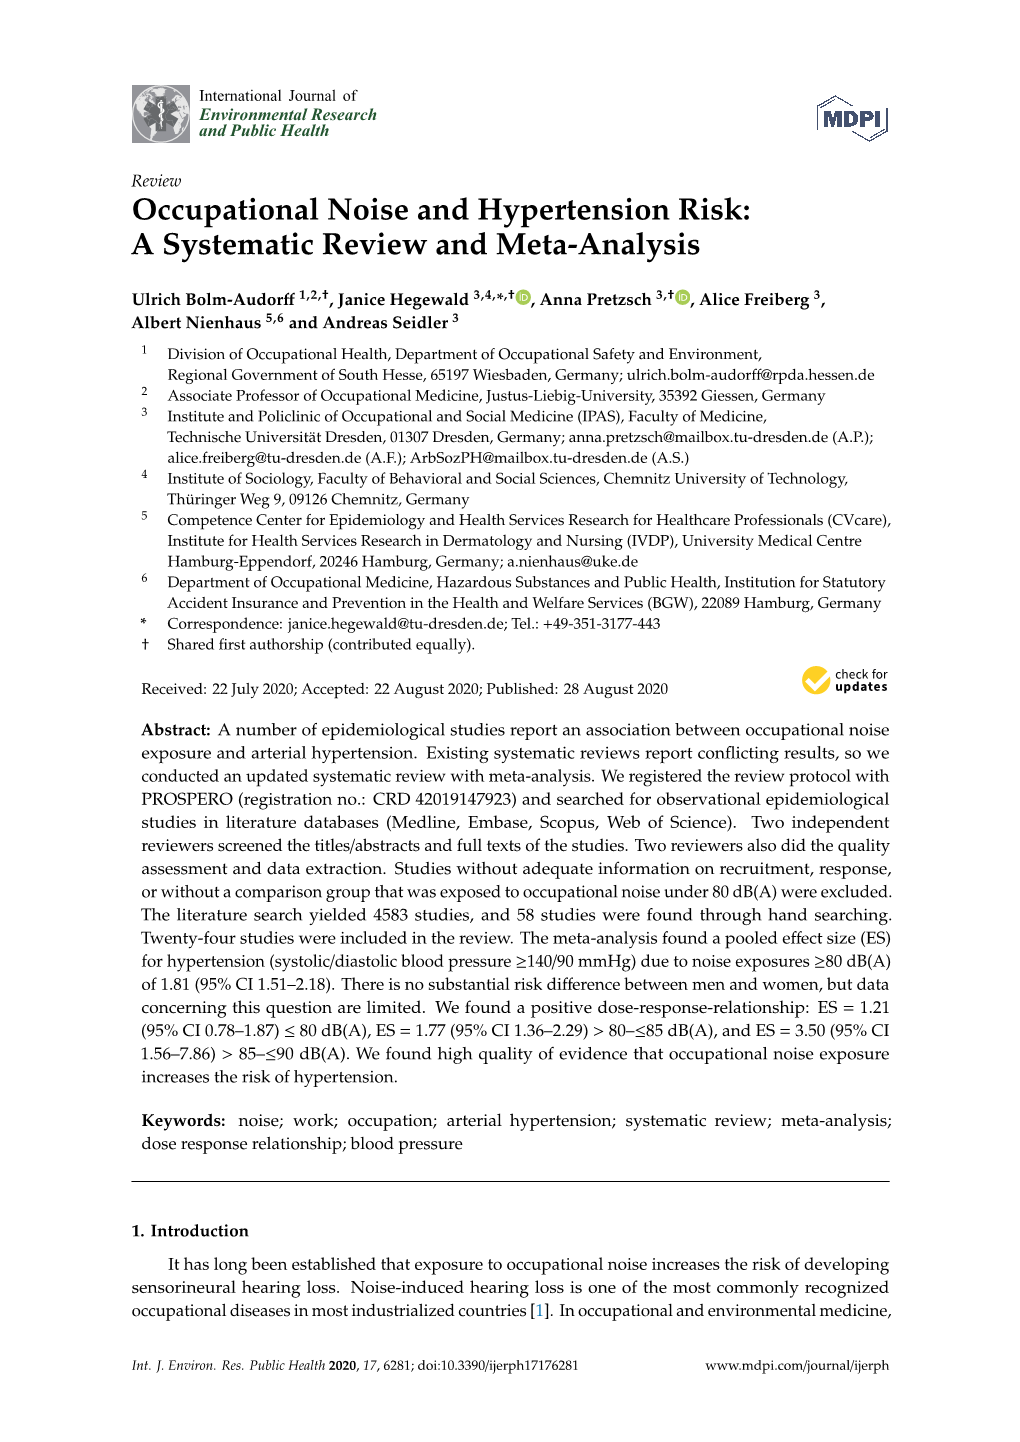 Occupational Noise and Hypertension Risk: a Systematic Review and Meta-Analysis